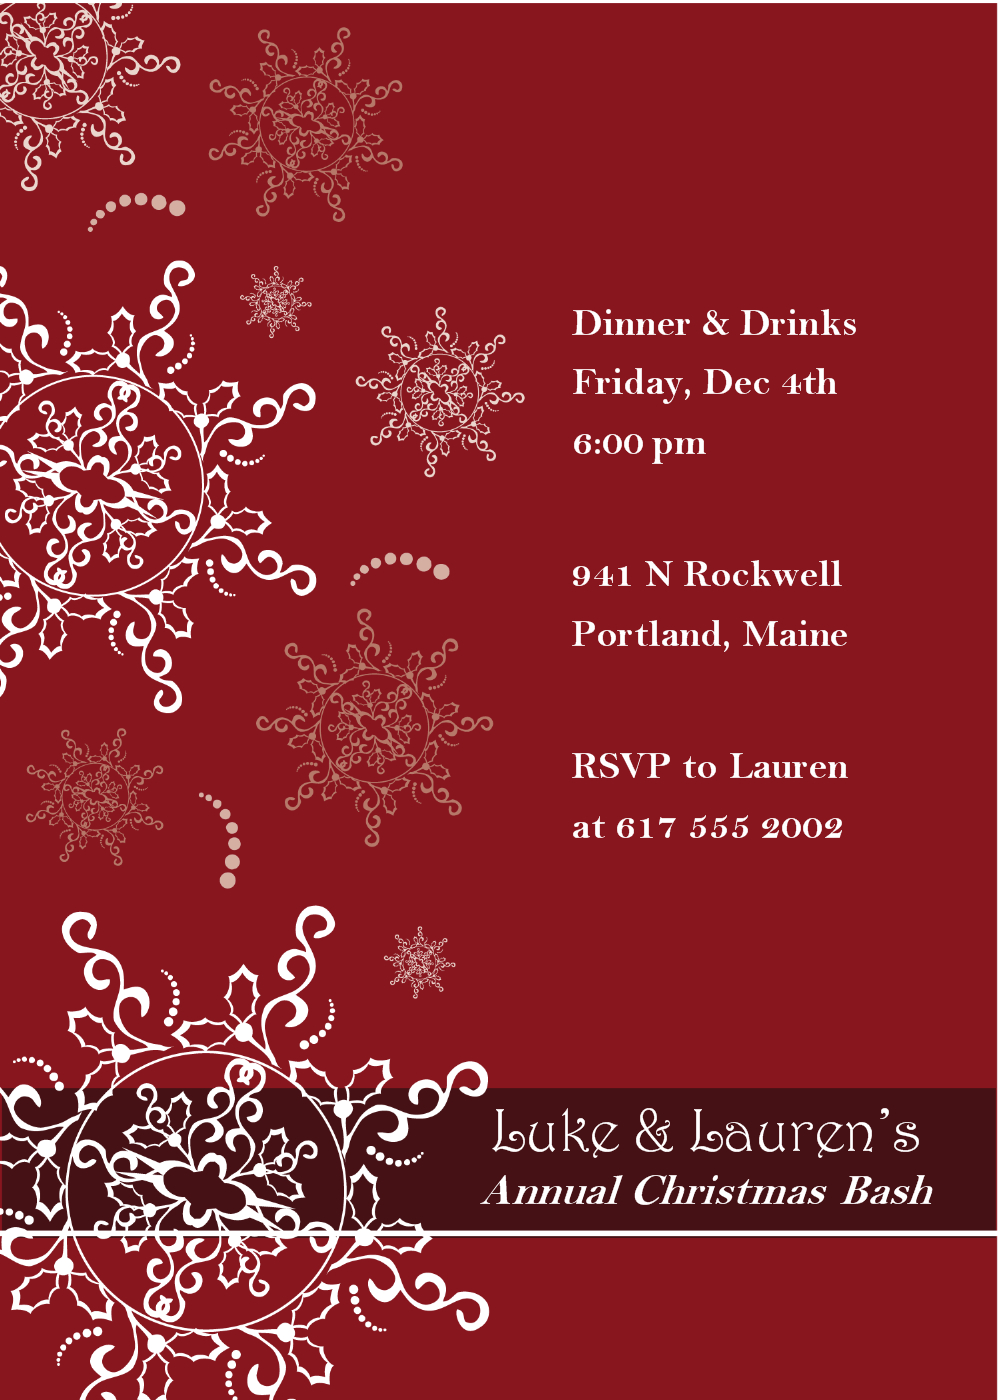 Christmas Party Invitation Templates Free Word With Regard To Free Dinner Invitation Templates For Word